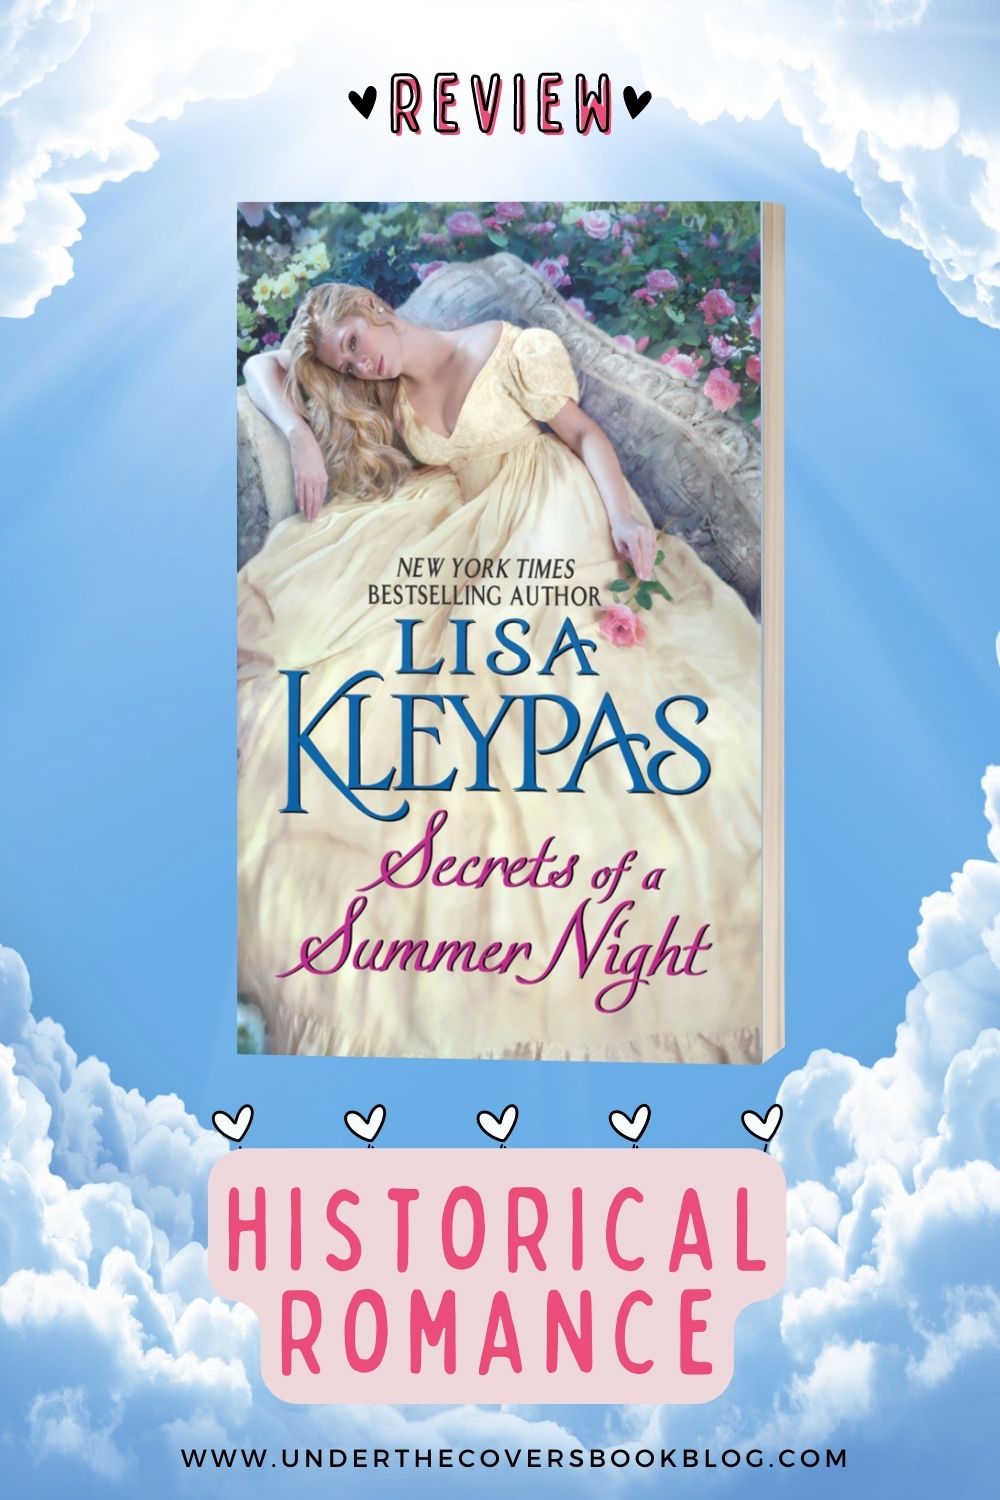 Historical Review: Secrets of a Summer Night by Lisa Kleypas